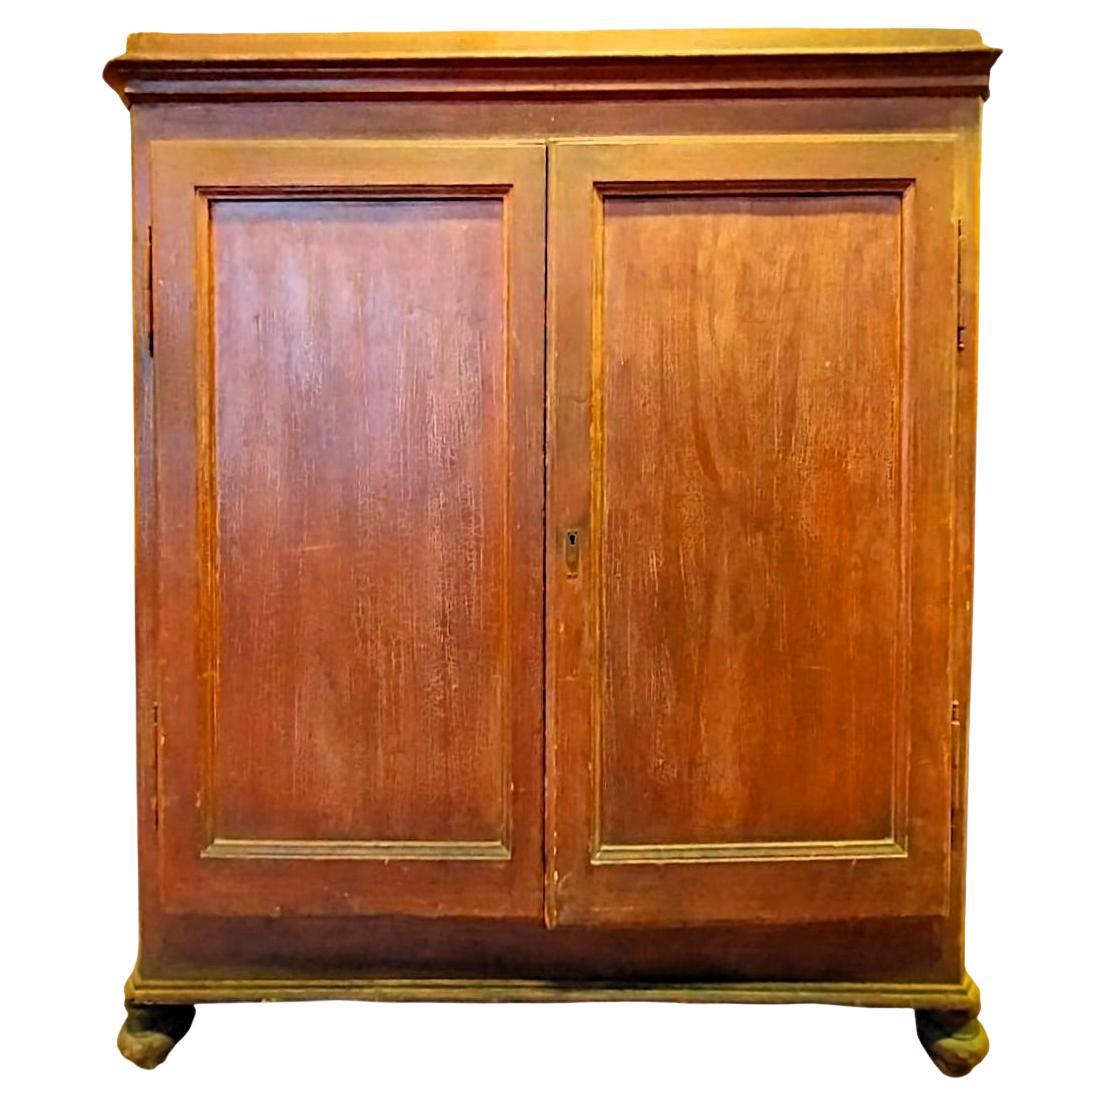 Spruce sideboard from the late 1800s with sliding interior shelves